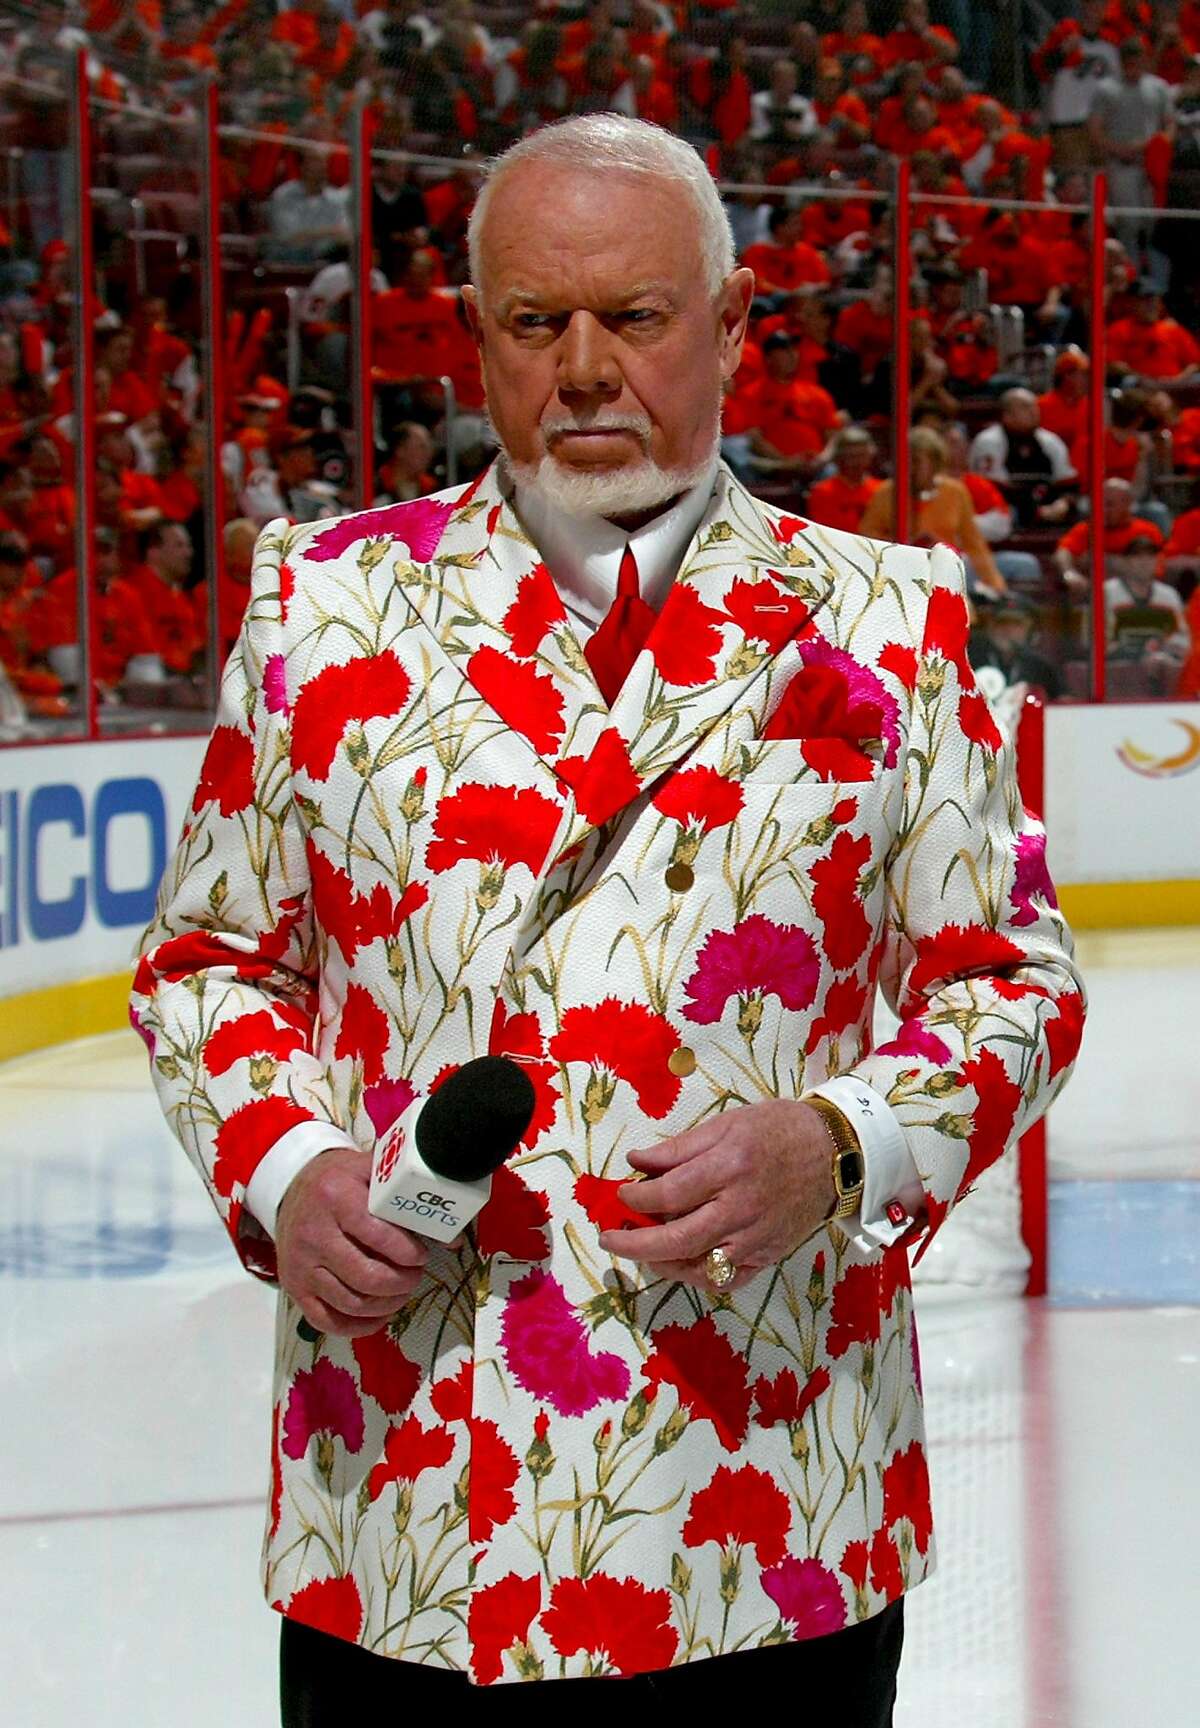 PITTSBURGH - MAY 13: Hockey commentator Don Cherry stands on the ice before the start of game three of the Eastern Conference Finals of the 2008 NHL Stanley Cup Playoffs between the Pittsburgh Penguins and the Philadelphia Flyers at Wachovia Center on May 13, 2008 in Philadelphia, Pennsylvania. 